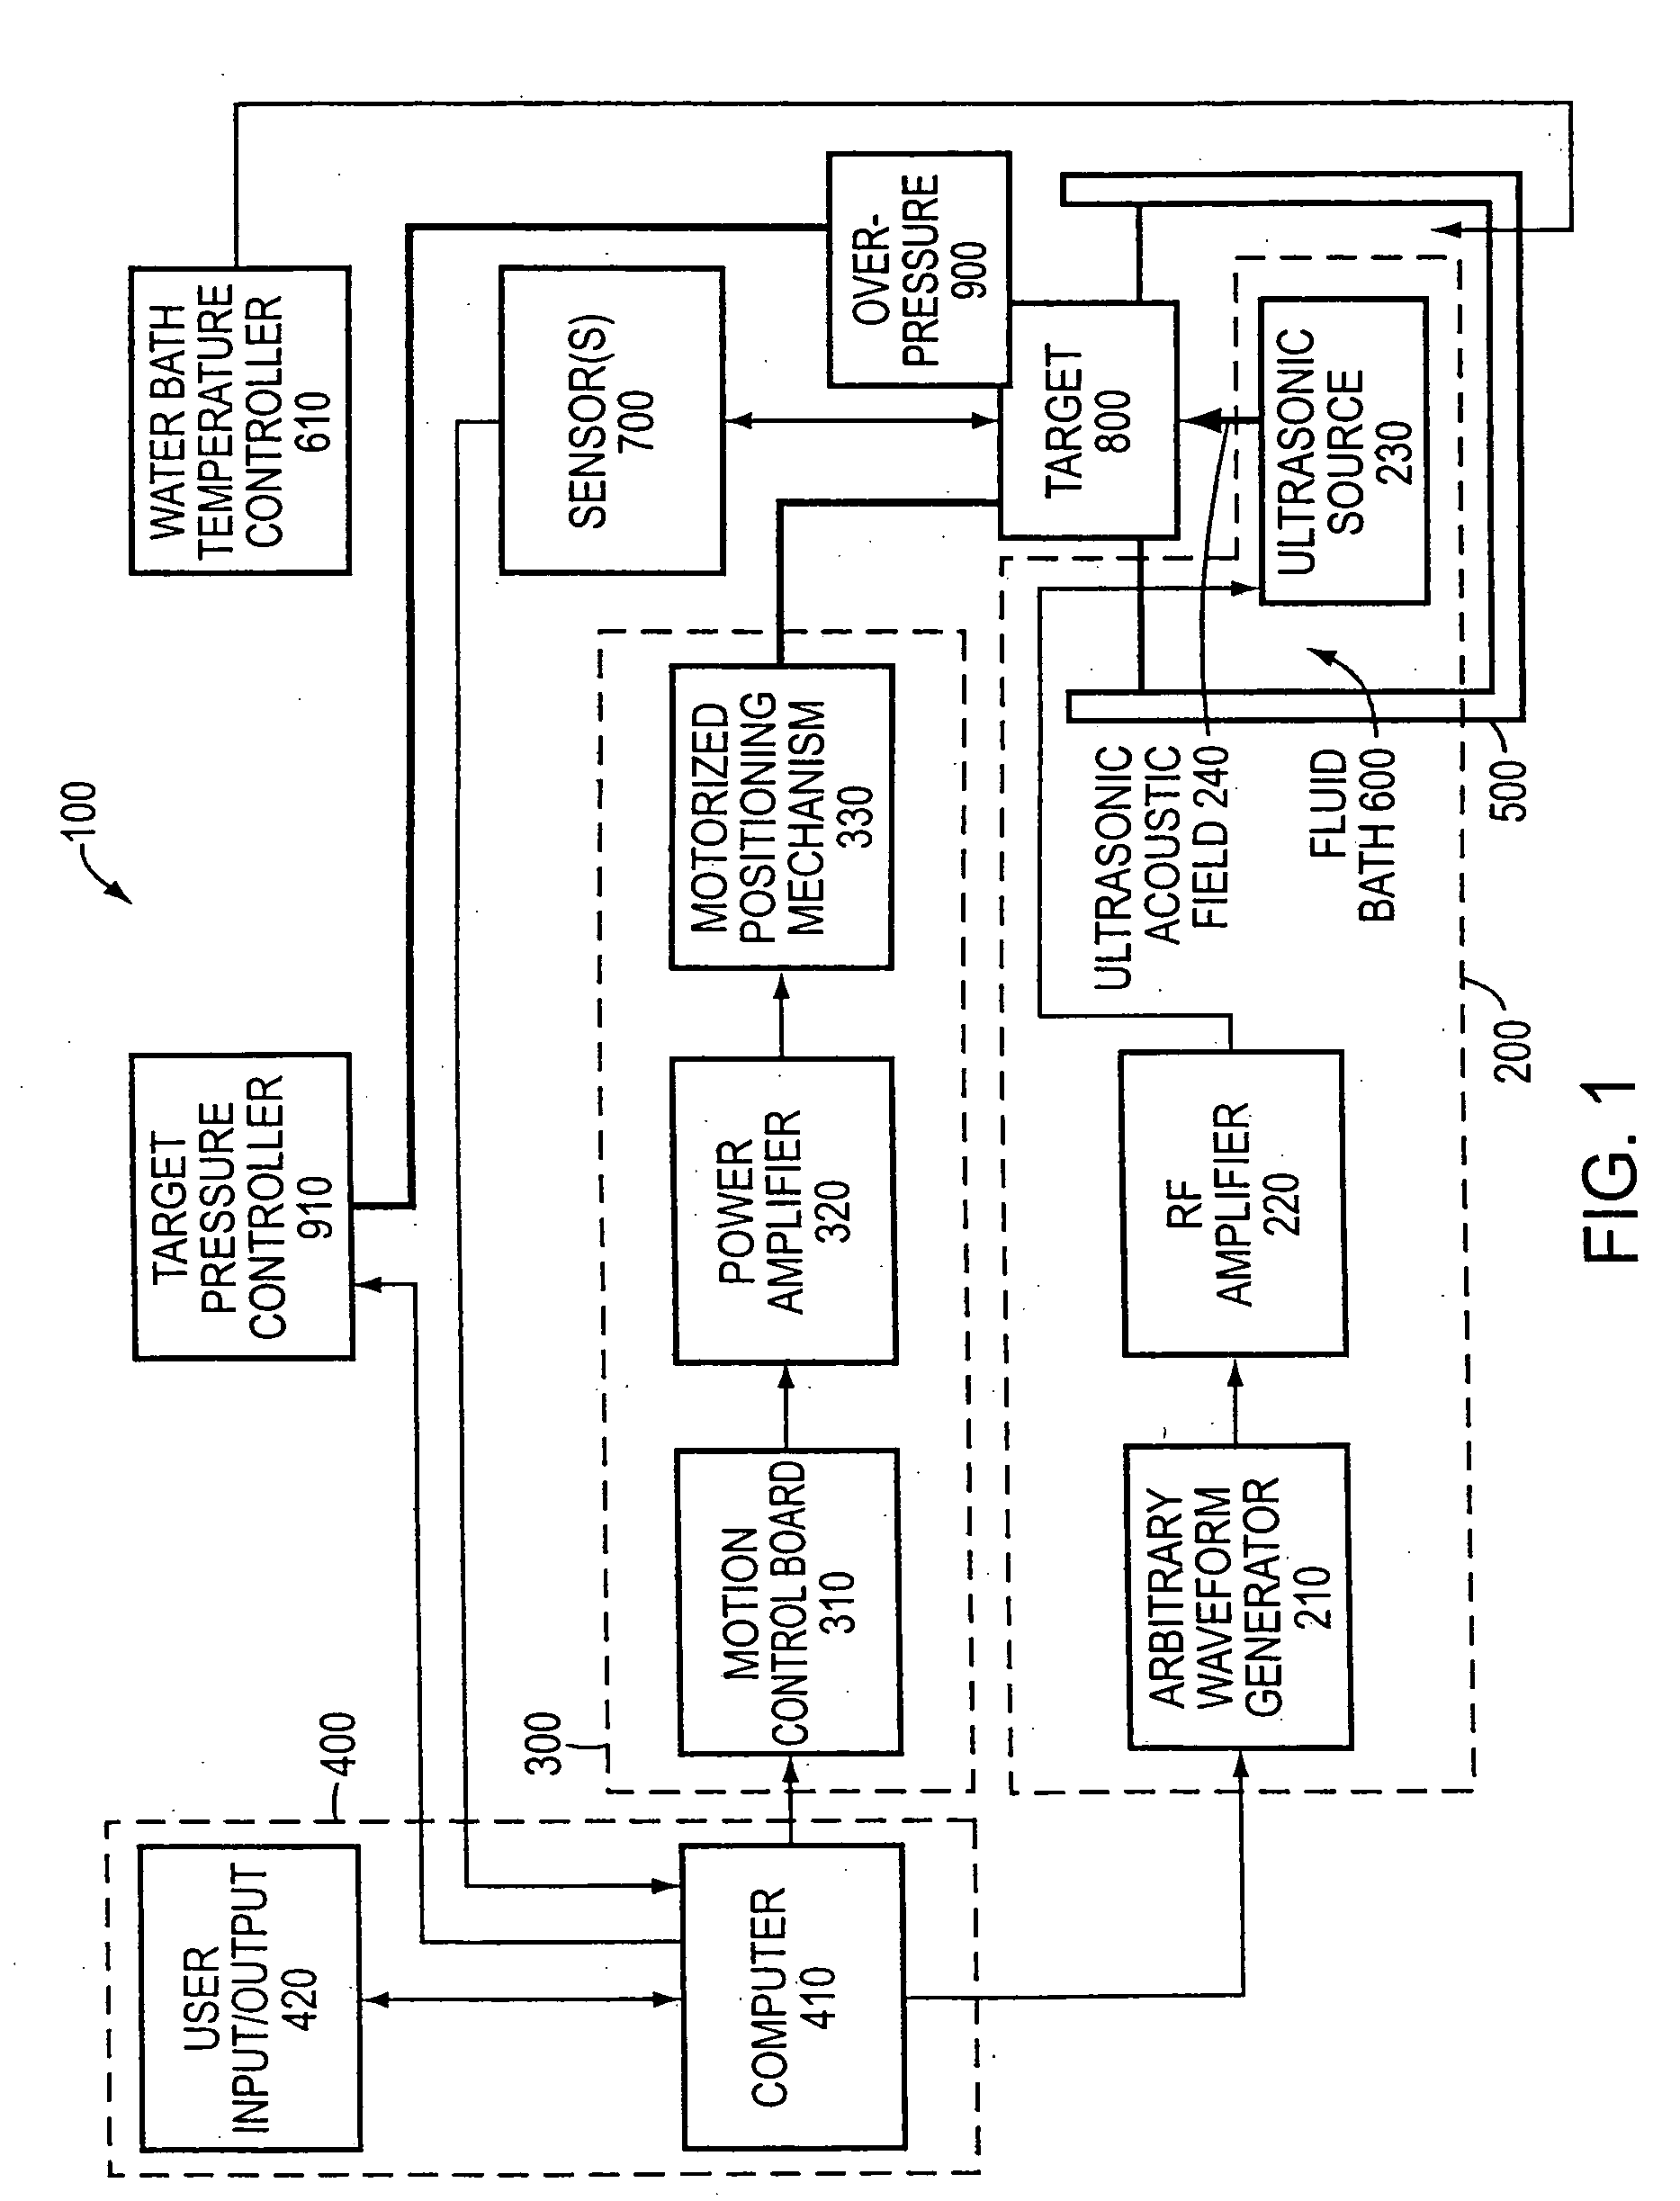 Method and apparatus for acoustically controlling liquid solutions in microfluidic devices